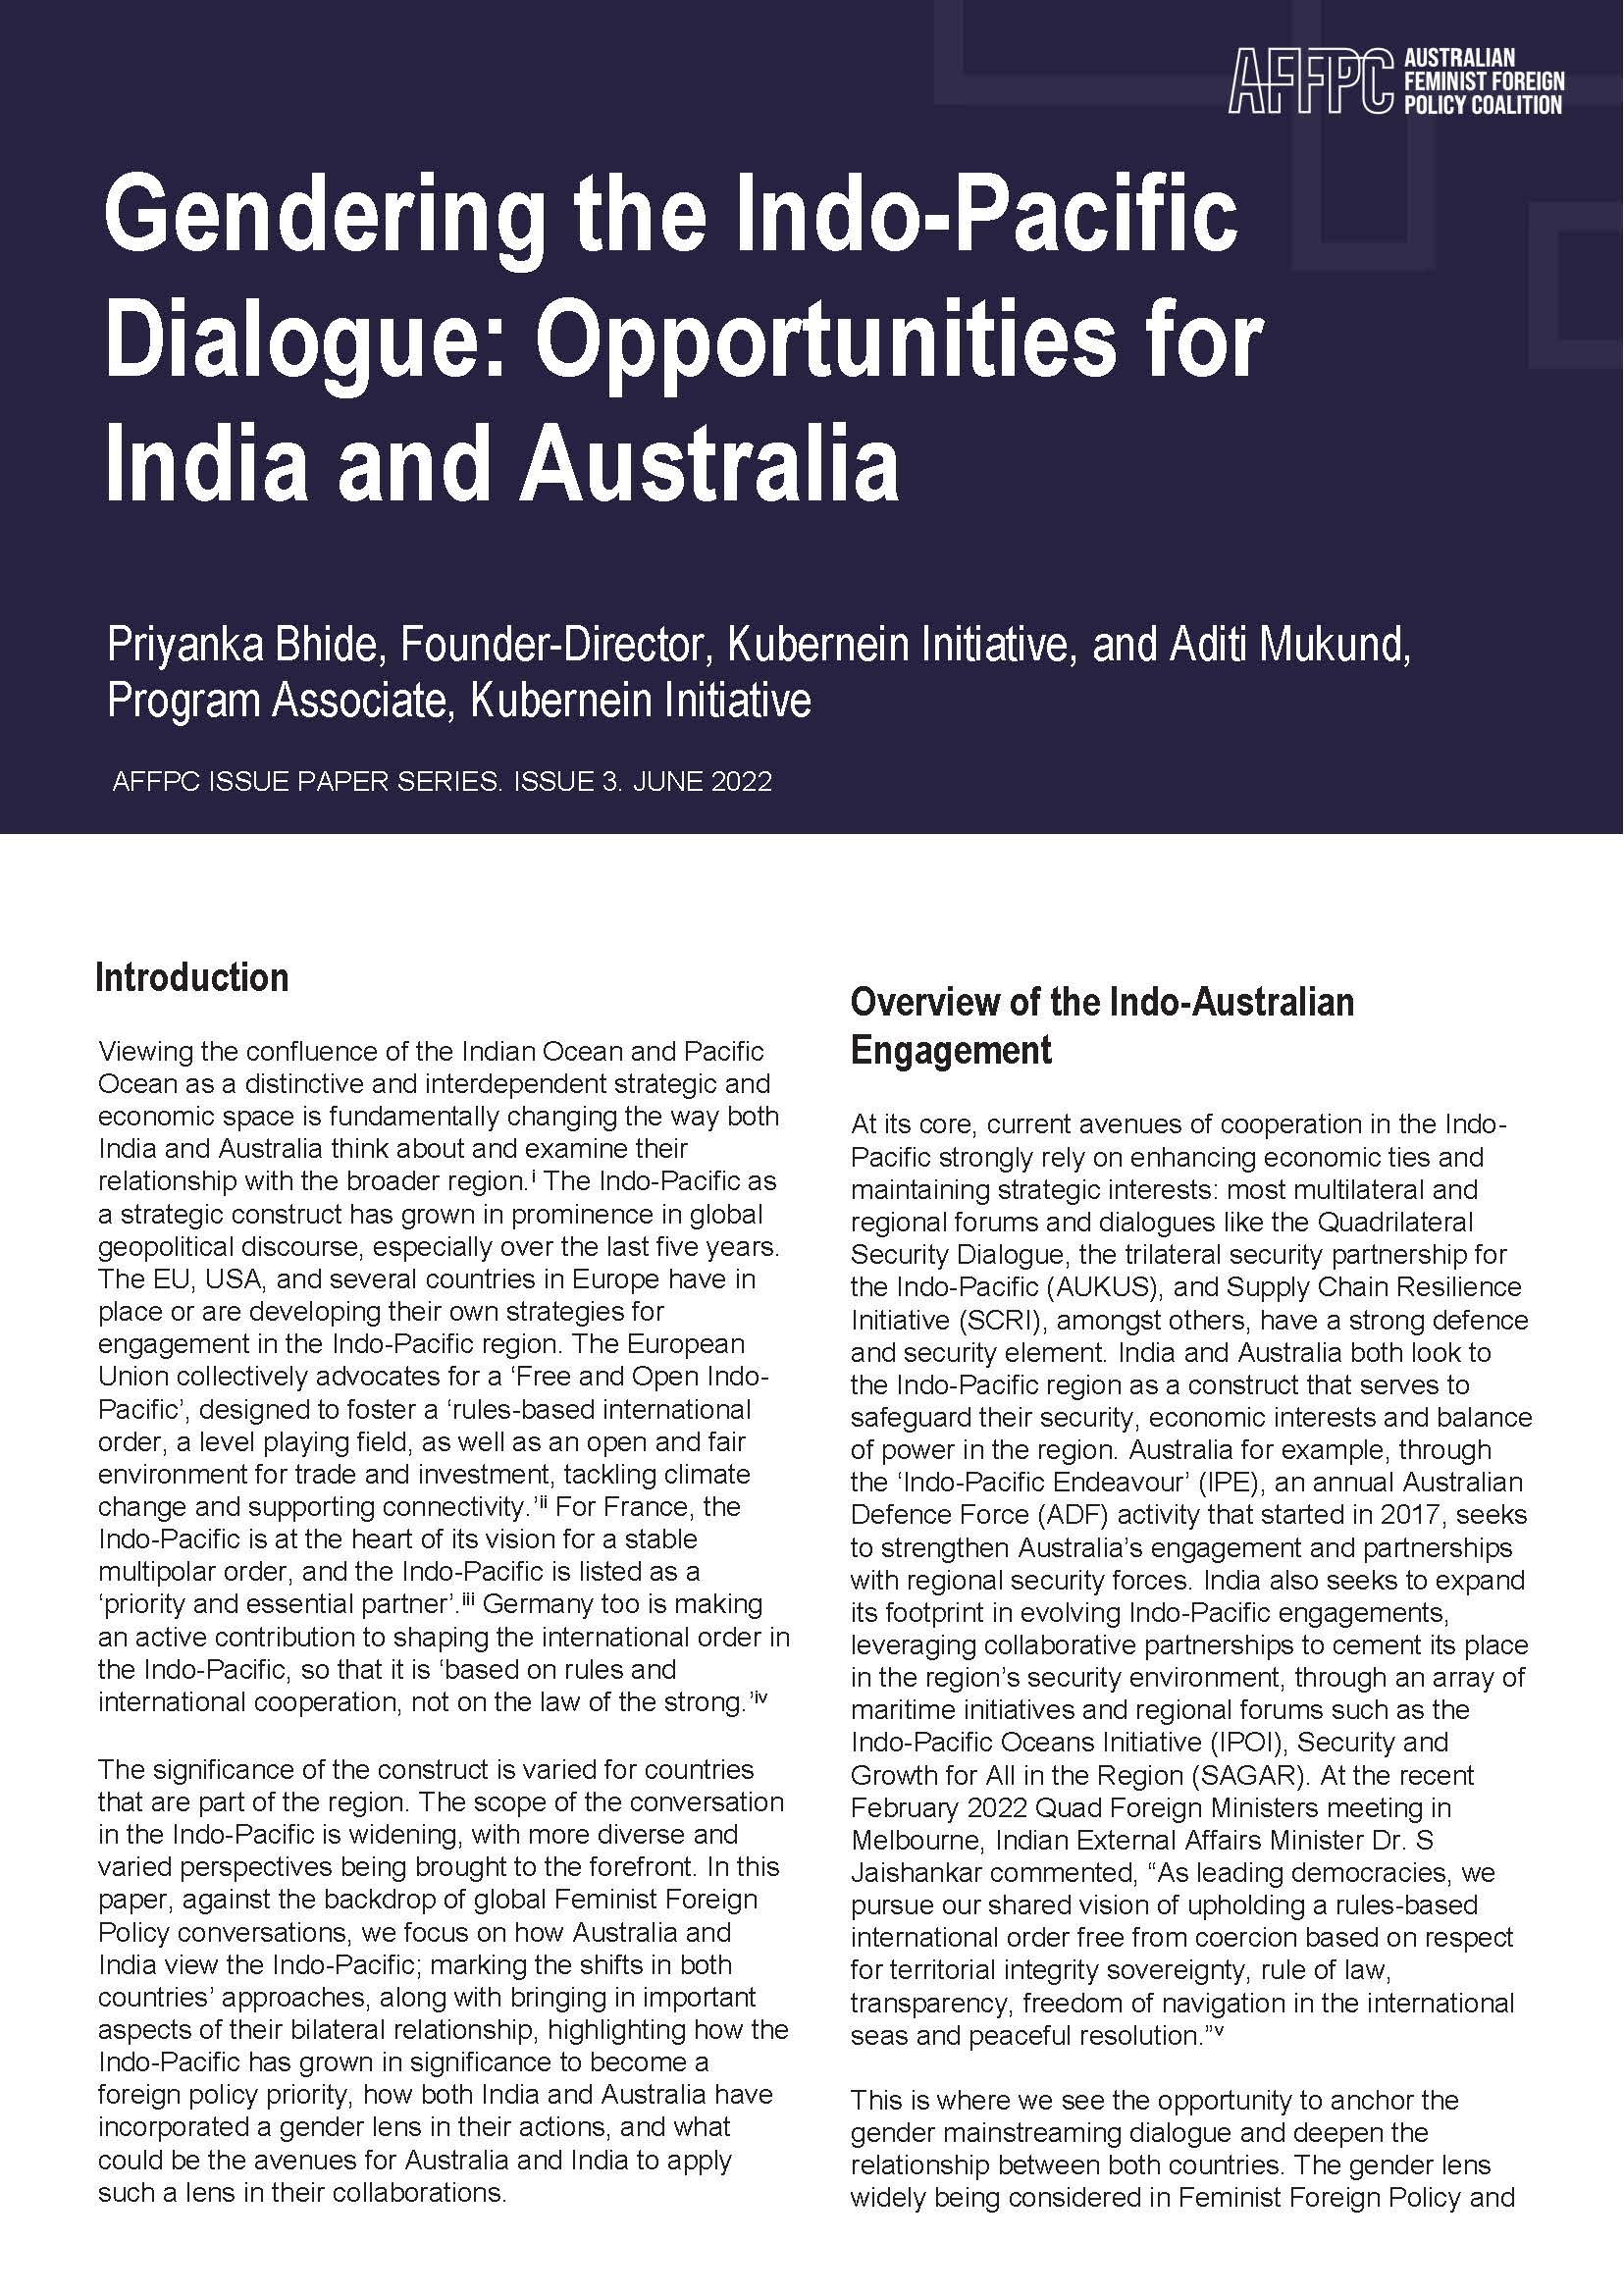 Cover page of the AFFPC issues paper document